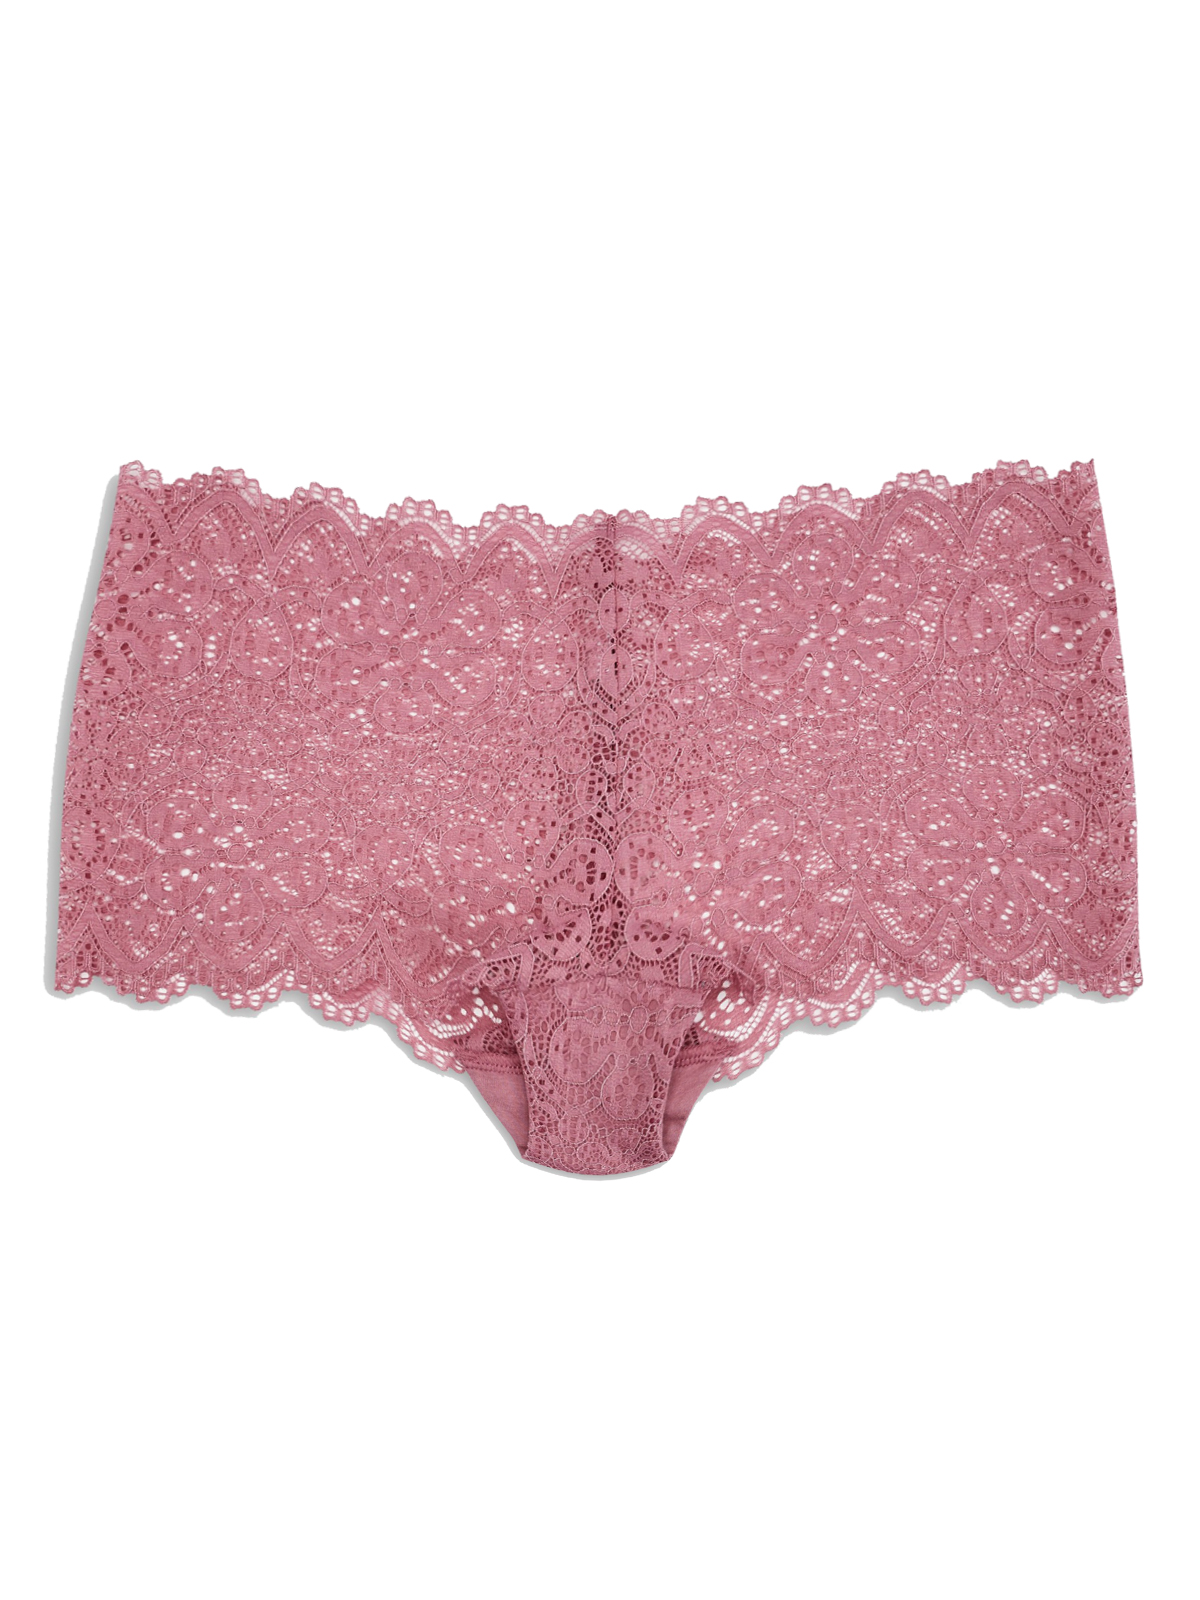 N3XT PINK Floral Lace Low Rise Knicker Shorts - Size 8 to 16